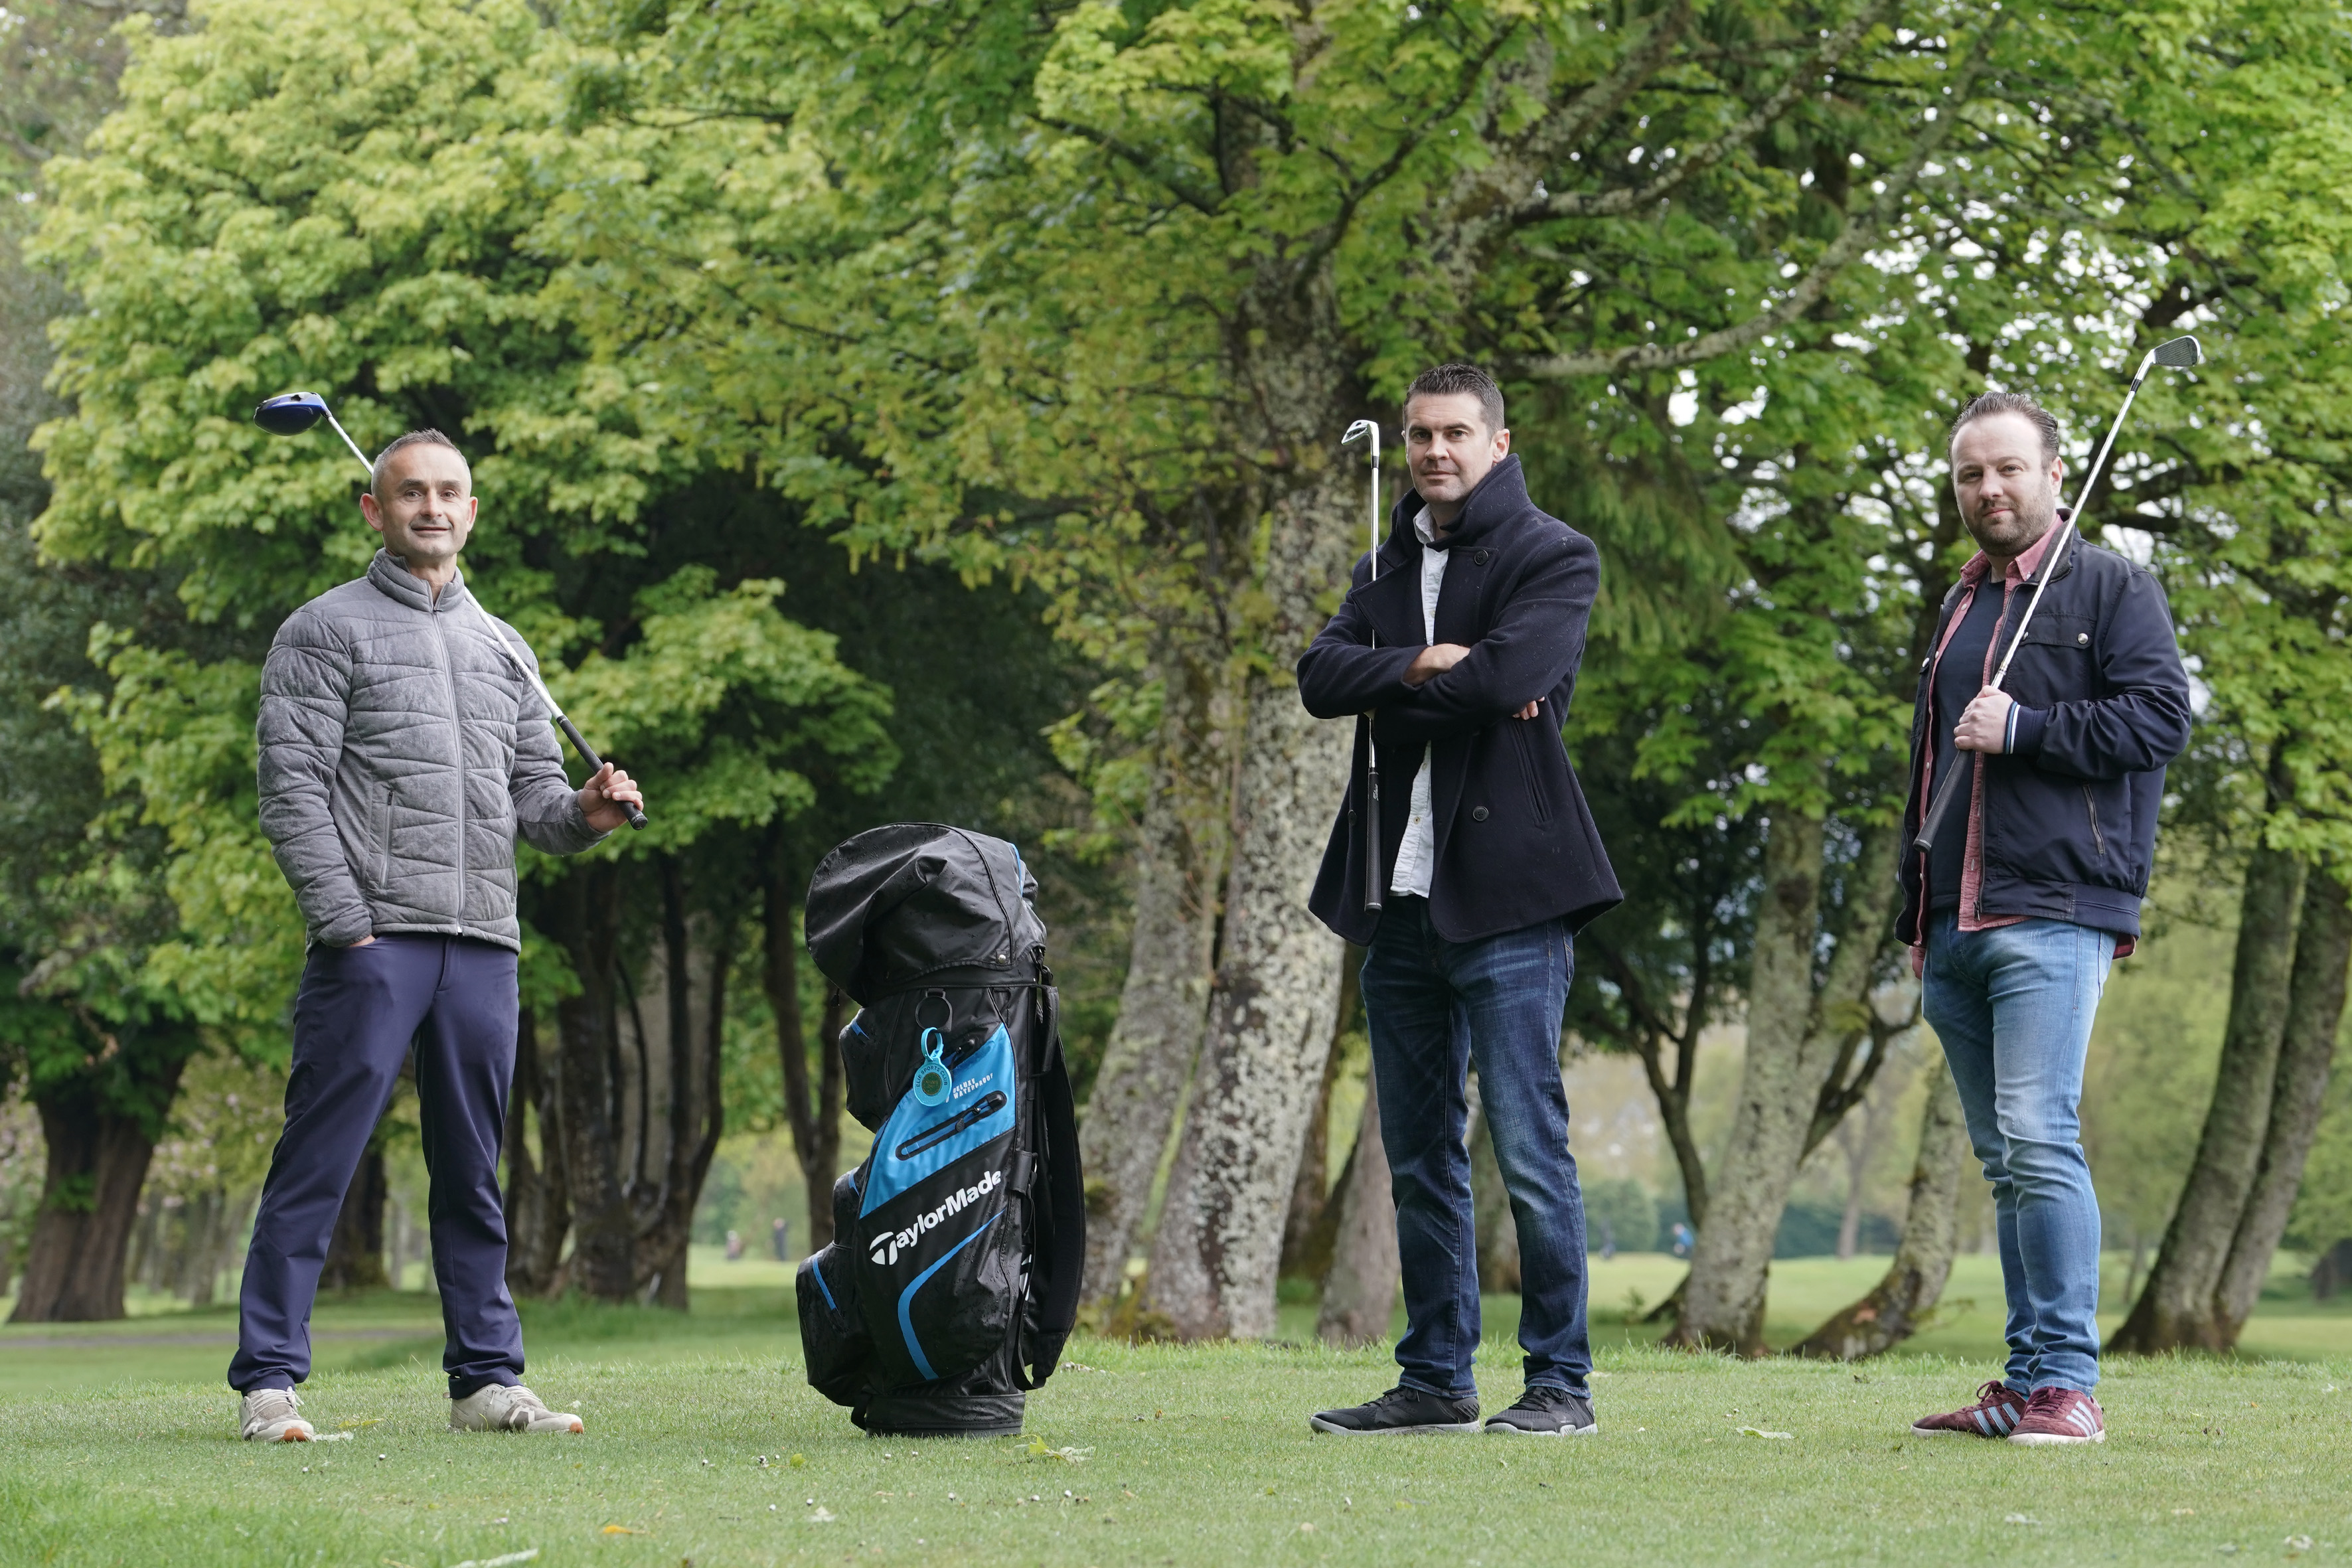 Scottish firm Affordable Golf makes key appointments as it closes in on £20 million revenues